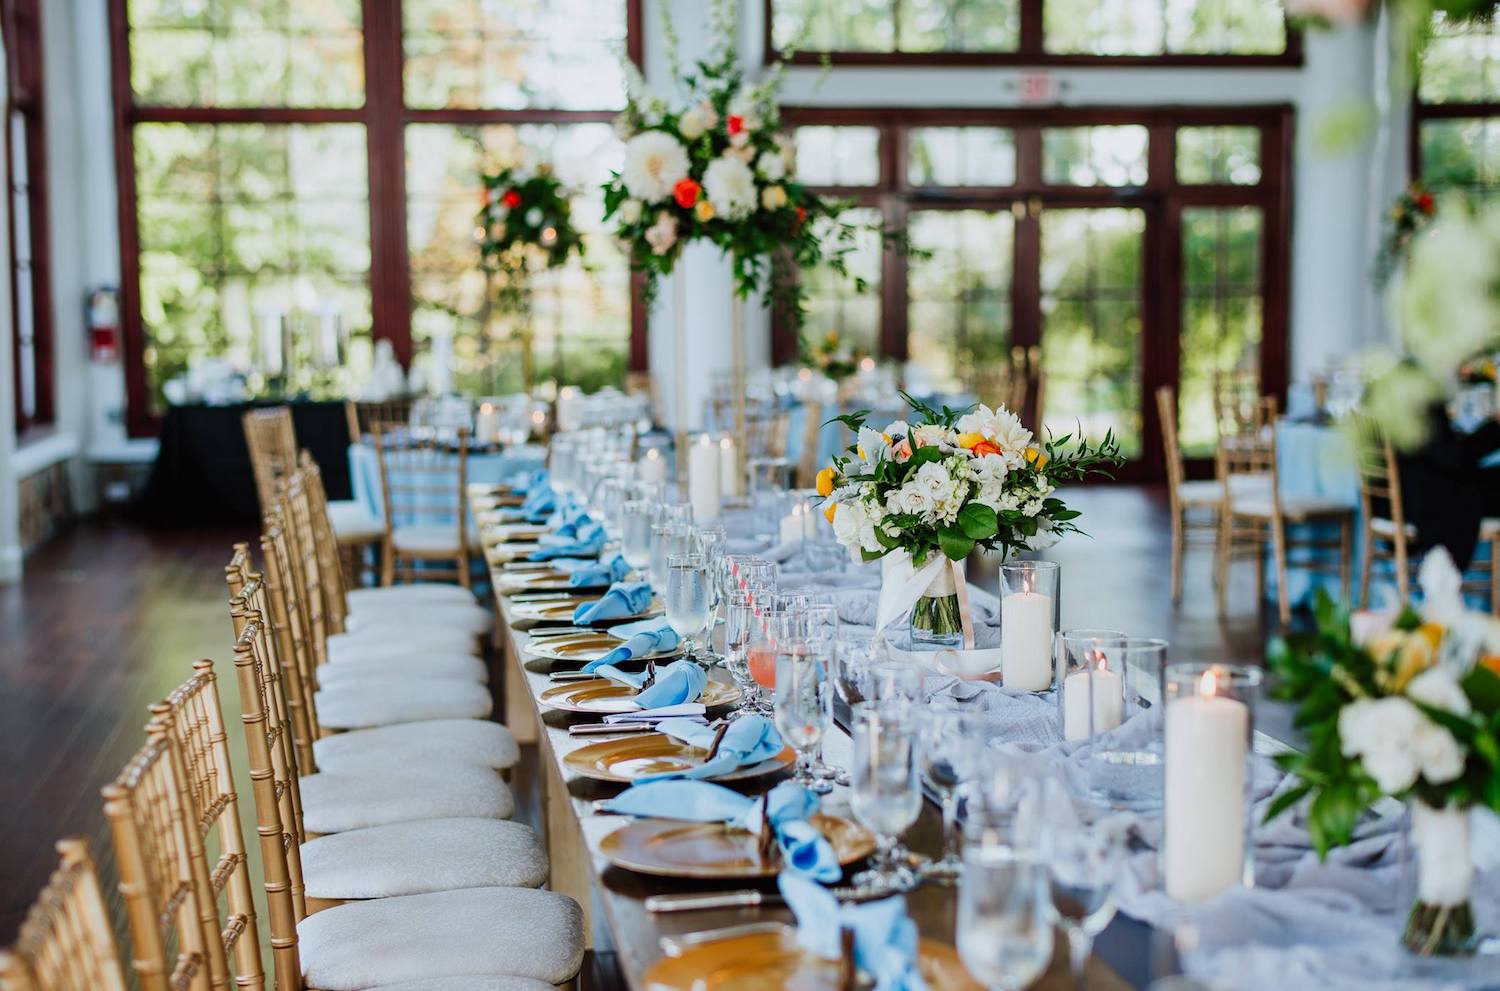 Emily Clack Photography at Raspberry Plain Manor, a King’s table with pillar candles in cylinders. bridesmaids bouquets and tall floral centerpieces on vintage gold plant stands.